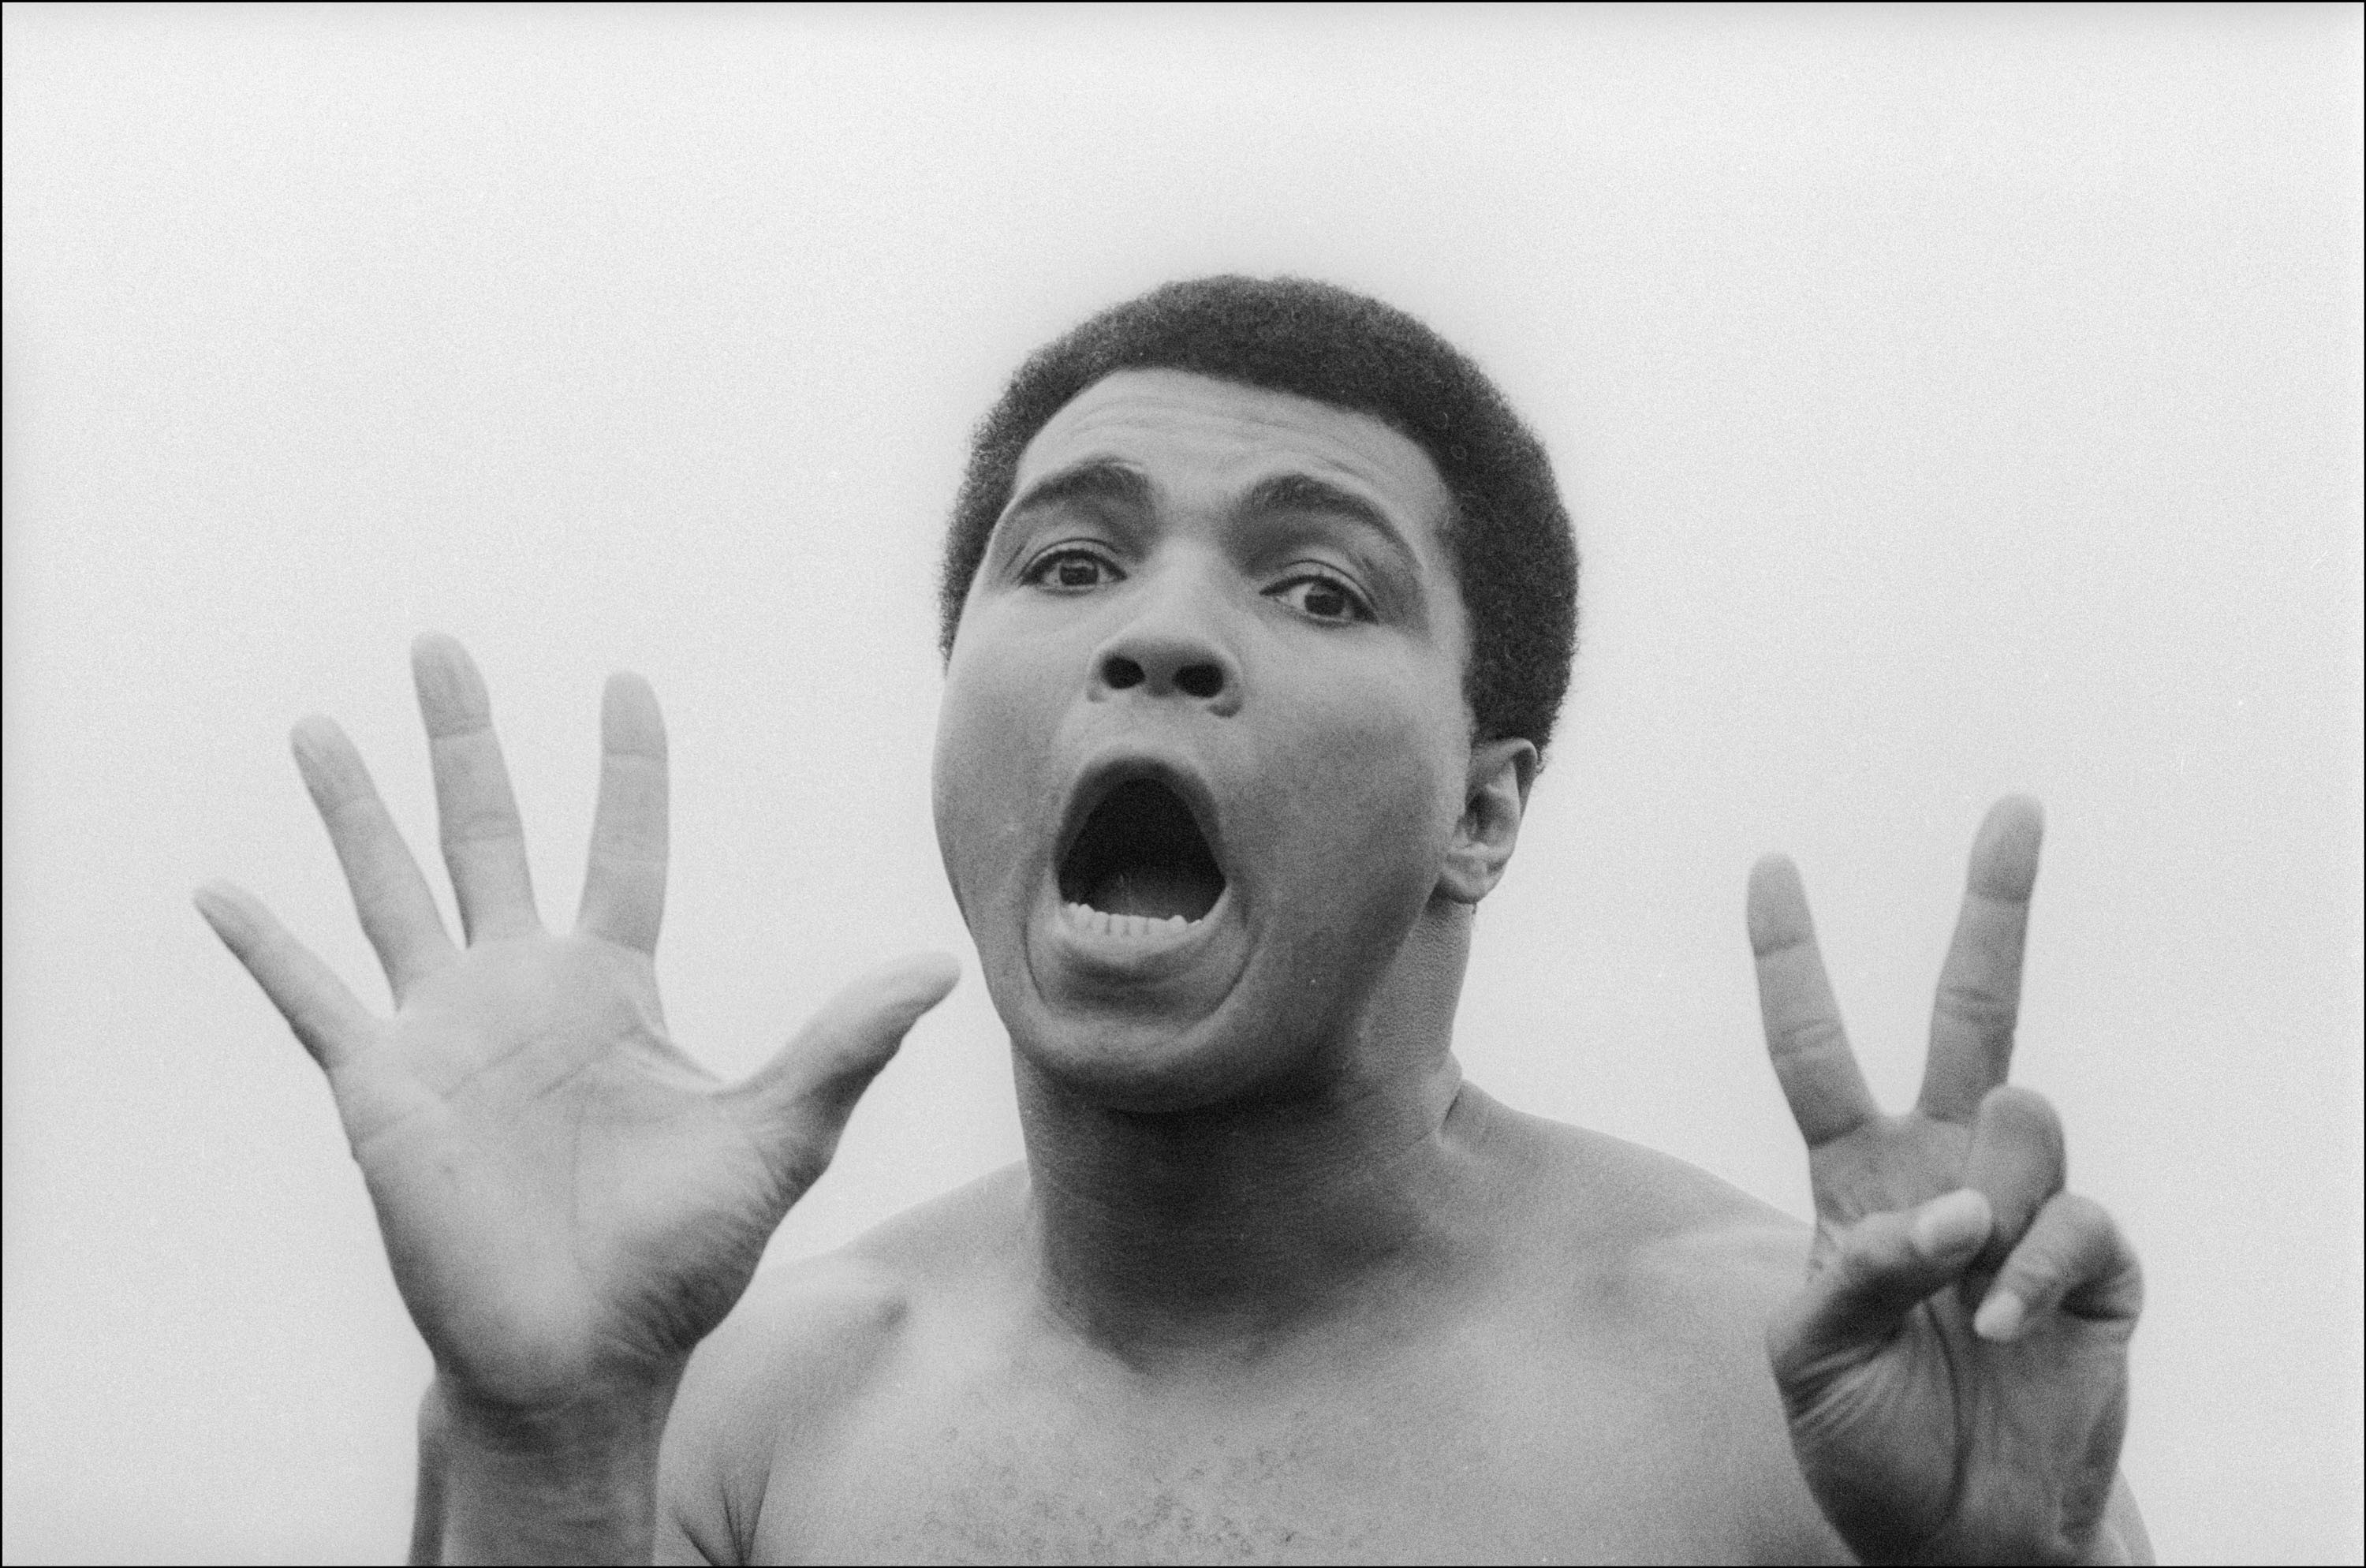 September 22, 1977 - Deer Park, Pennsylvania, United States: After a workout at his training camp, Muhammad Ali makes the number seven to signify the number of rounds to defeat his next opponent. Ali went on to defeat Earnie Shavers in a fifteen round unanimous decision on September 29 and retained the Ring, WBC & WBA World Heavyweight titles., Image: 288876179, License: Rights-managed, Restrictions: , Model Release: no, Credit line: Profimedia, Polaris